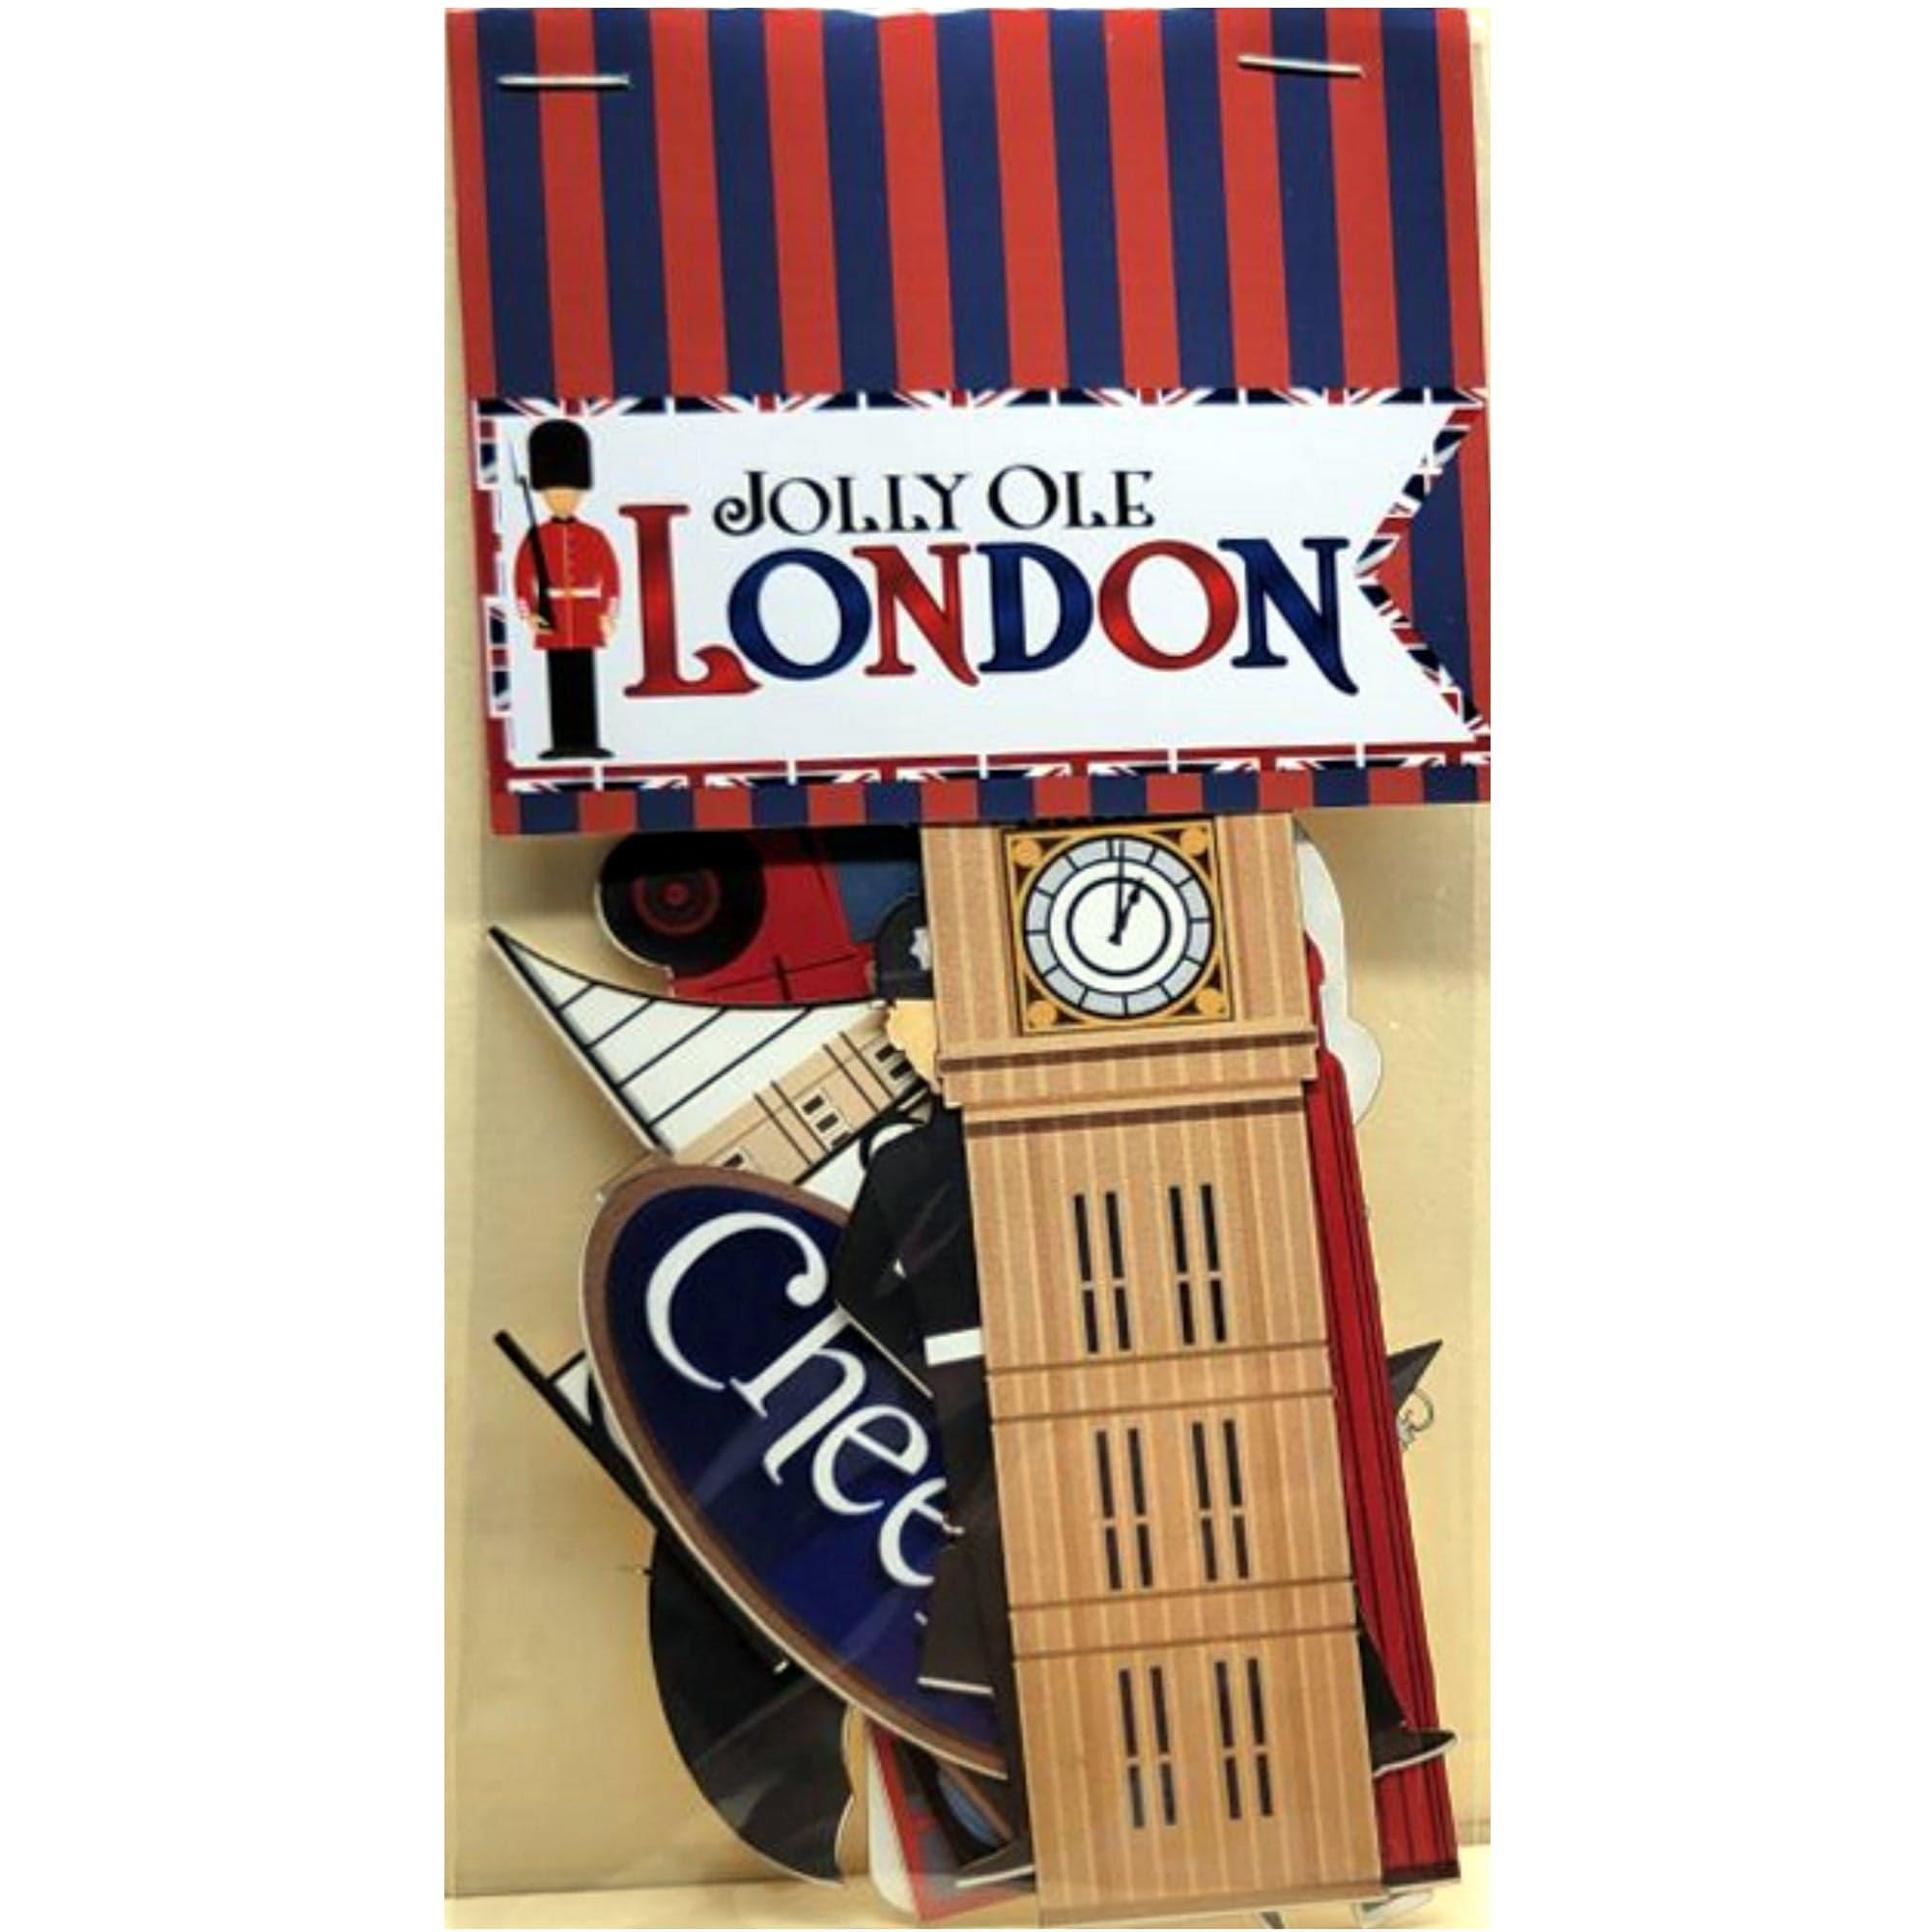 MNineDesign's Jolly Ole London 12 x 12 Scrapbook Paper & Embellishment Kit by SSC Designs - Scrapbook Supply Companies